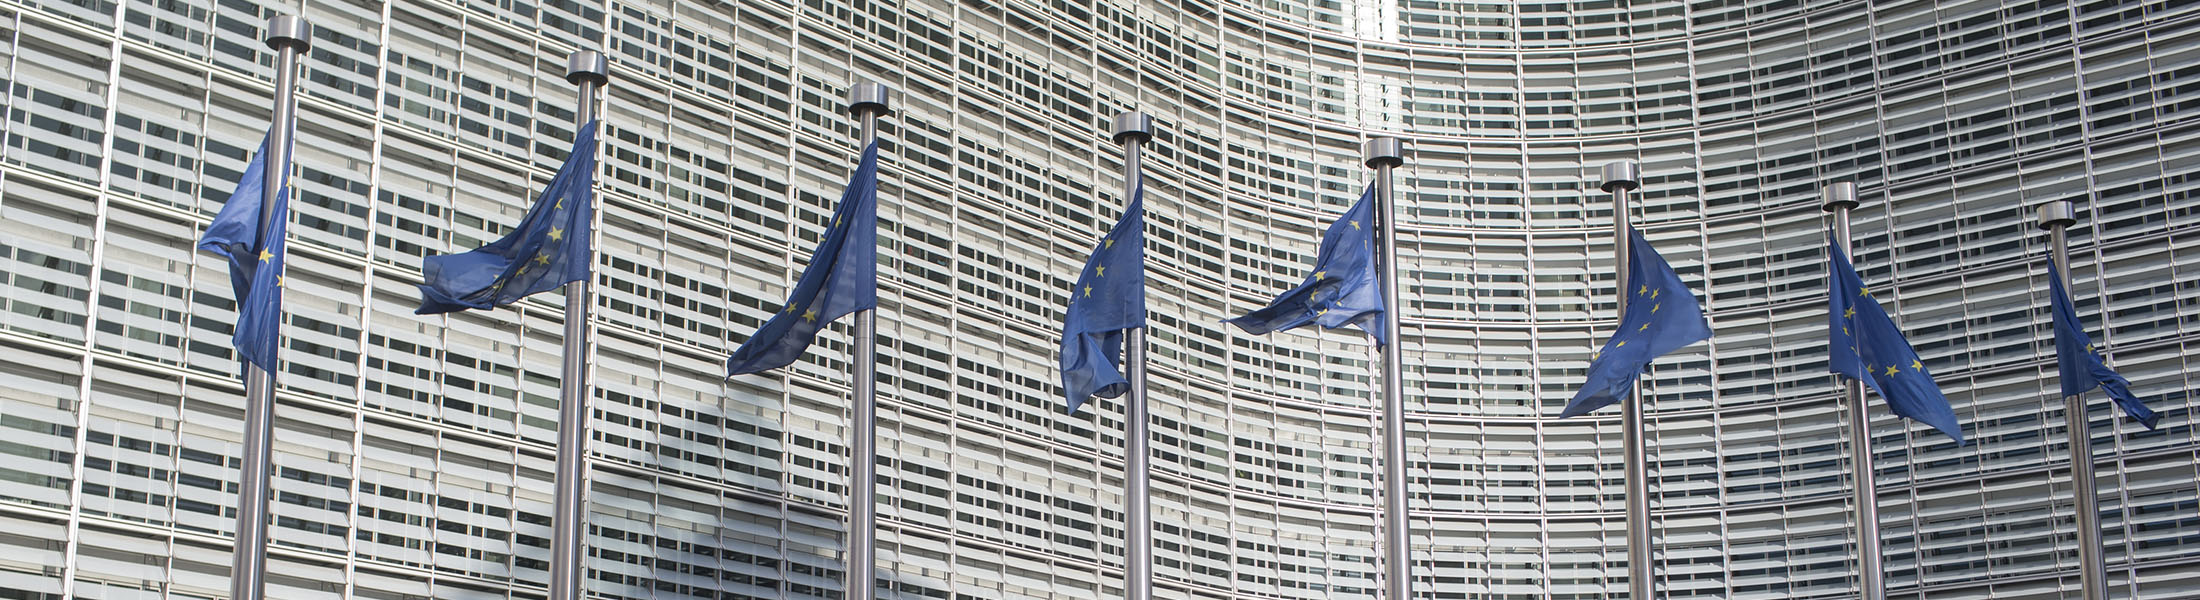 A pedestrian passes flag poles as flags of the European Union (EU) fly outside the European Commission building in Brussels, Belgium, on Saturday, April 23, 2016. European Union policy makers need to standardize insolvency laws across the bloc if new bank-failure rules are to work effectively, according to Elke Koenig, head of the euro area's central resolution authority.